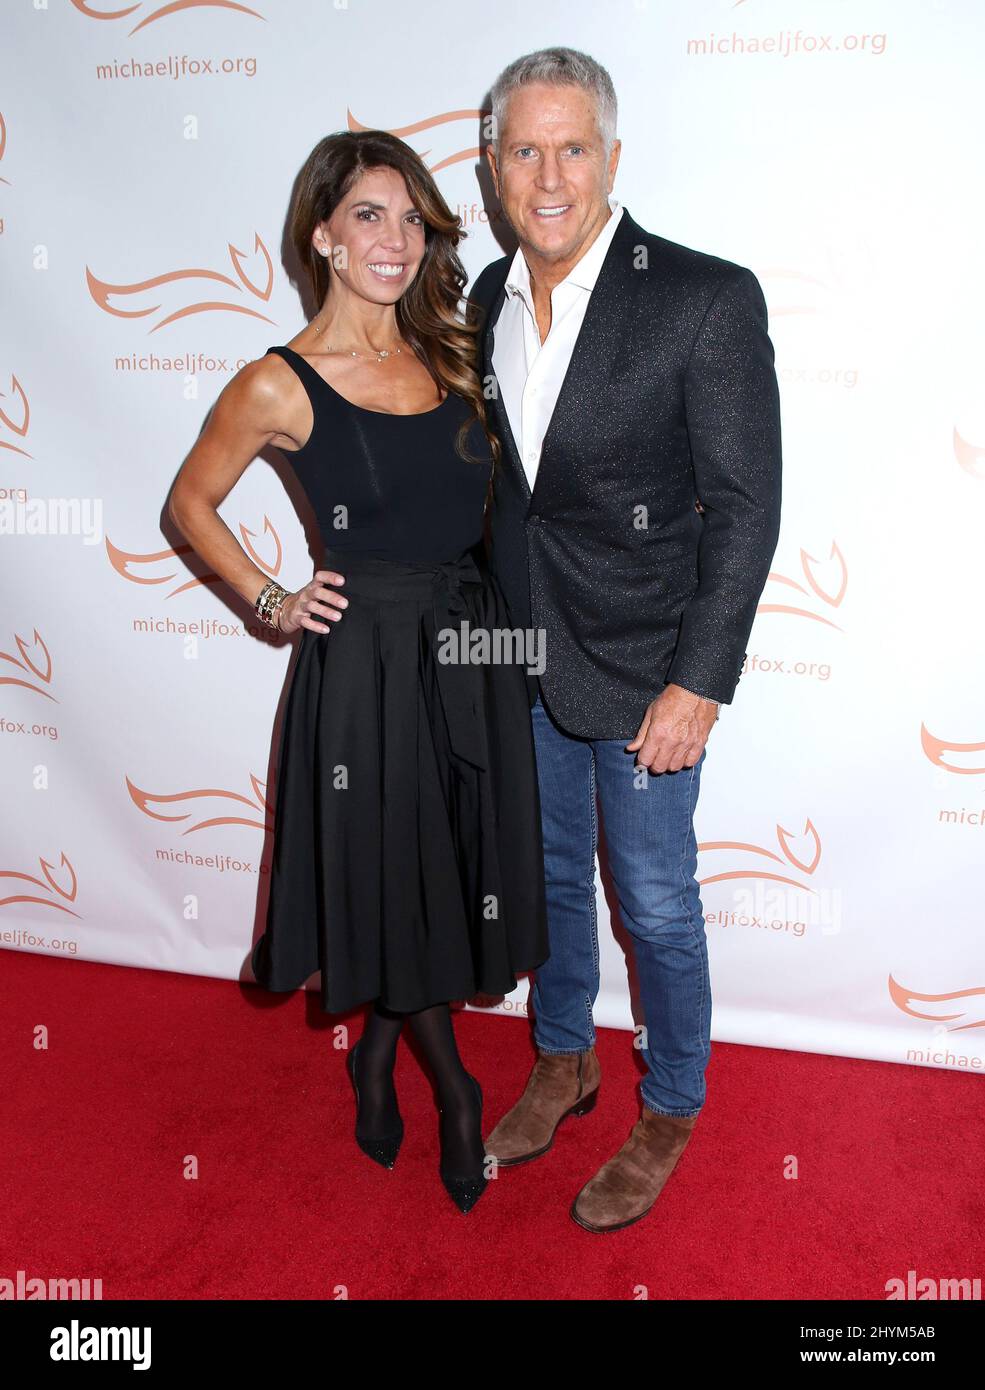 Danielle Lewis & Donny Deutsch attending the Michael J. Fox Foundation Gala 2019 'A Funny Thing Happened on the Way to Cure Parkinson's' held at Hilton New York on November 16, 2019 in New York City, NY Stock Photo